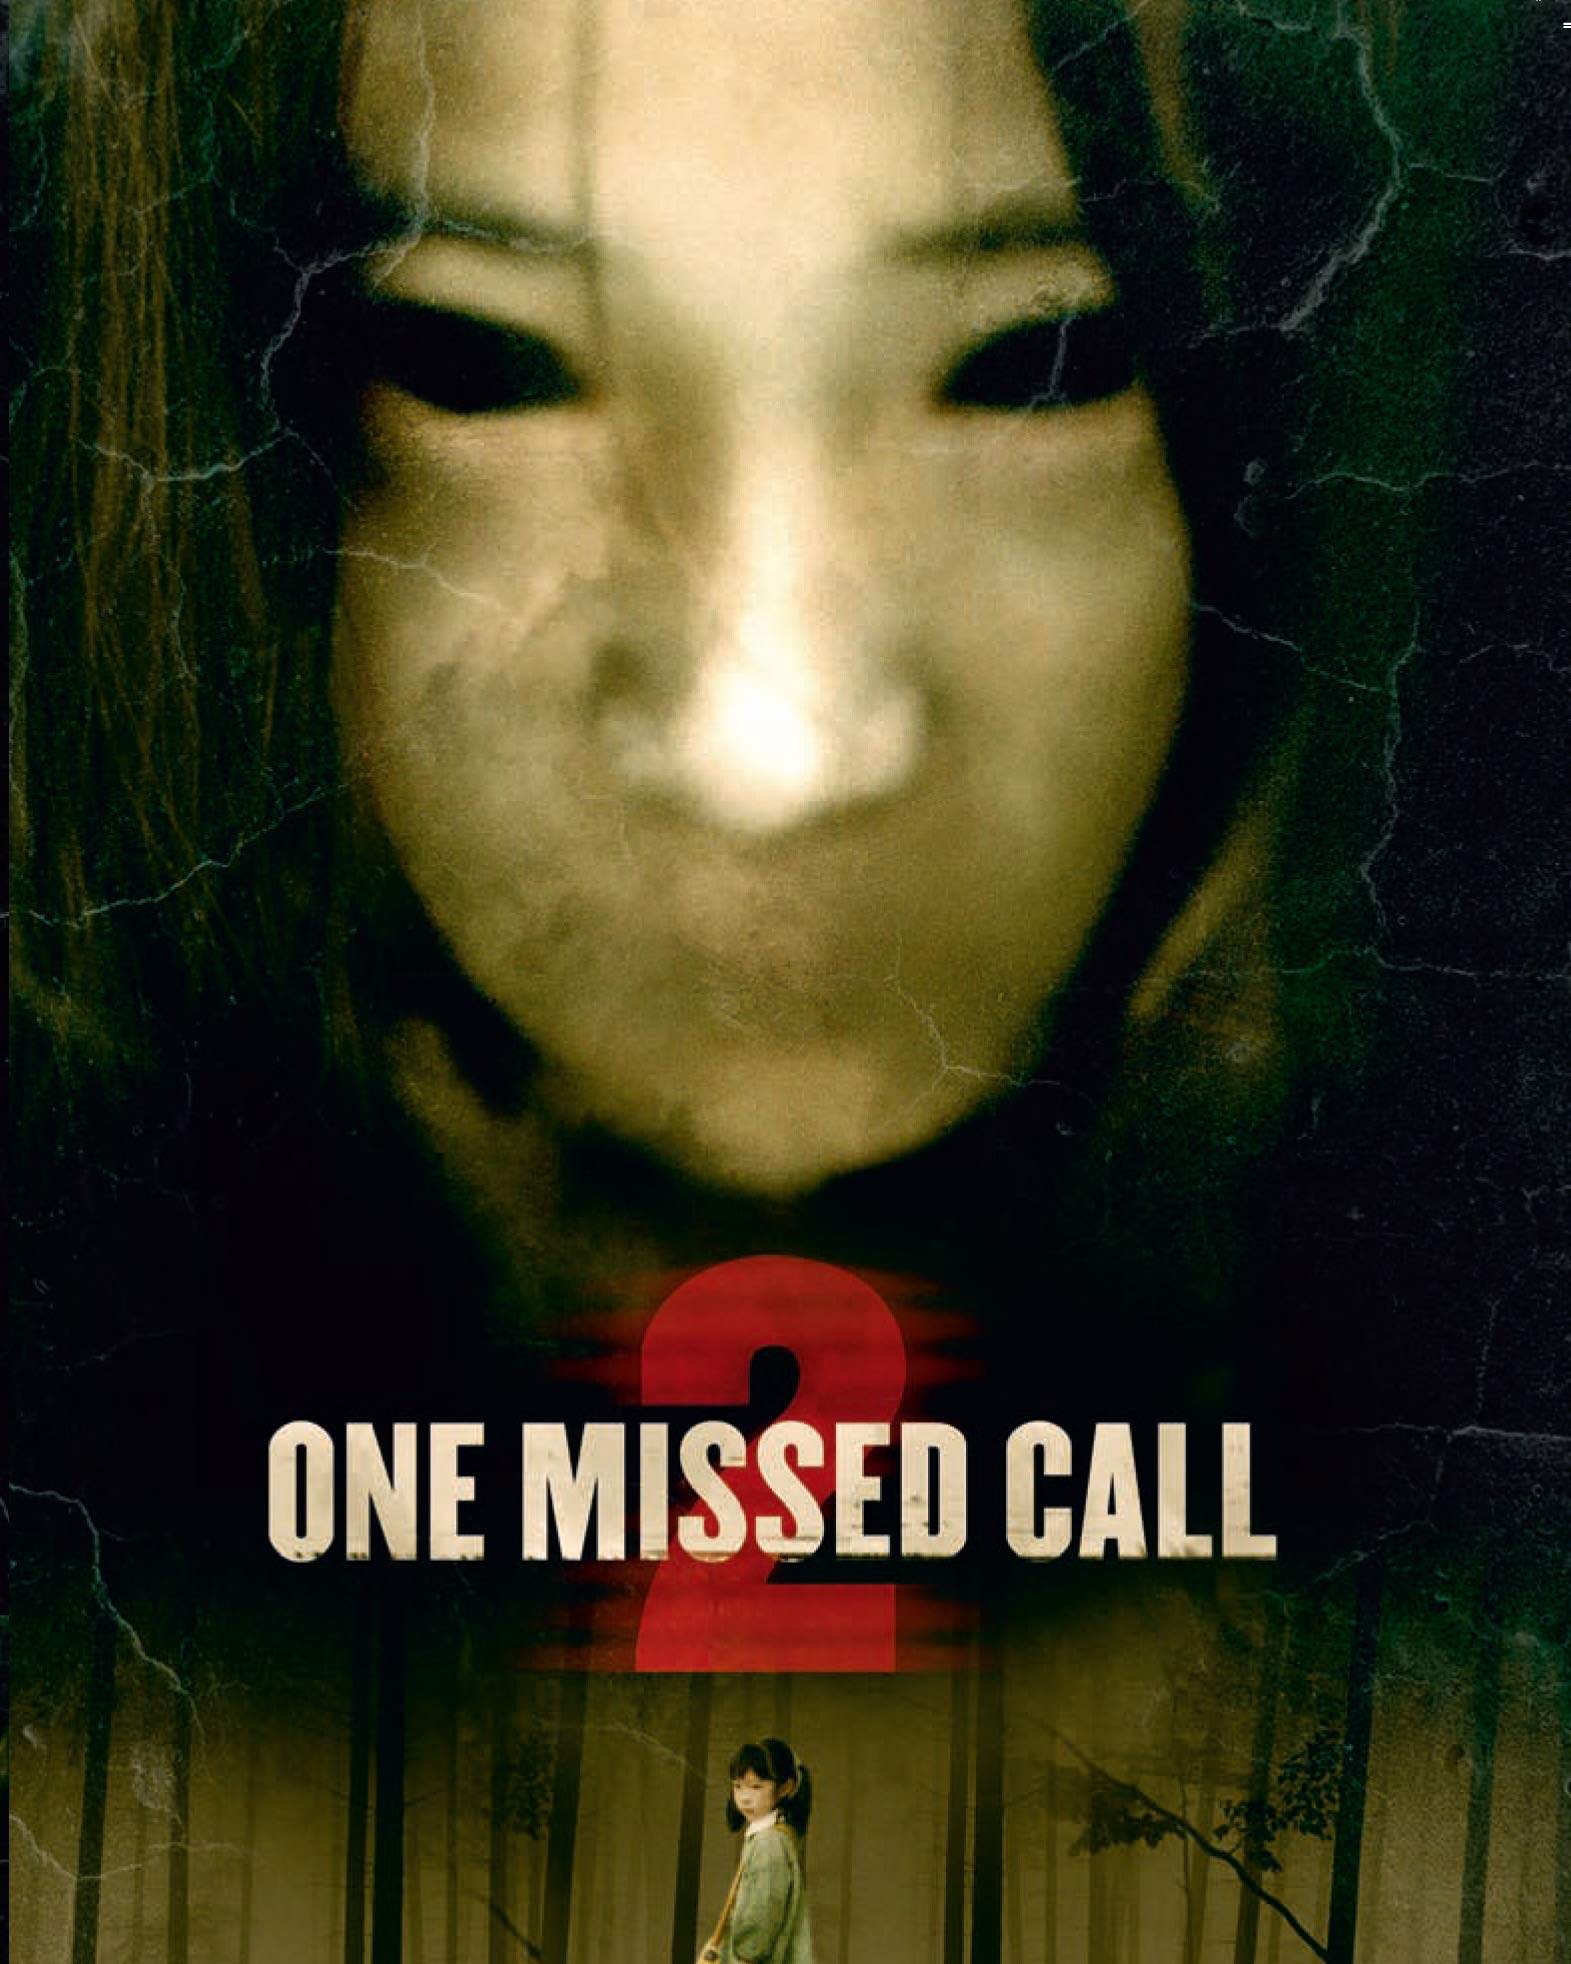 Zmeskany hovor 2 / One Missed Call 2 (2005) CZ/JAP (1080p) = CSFD 54%